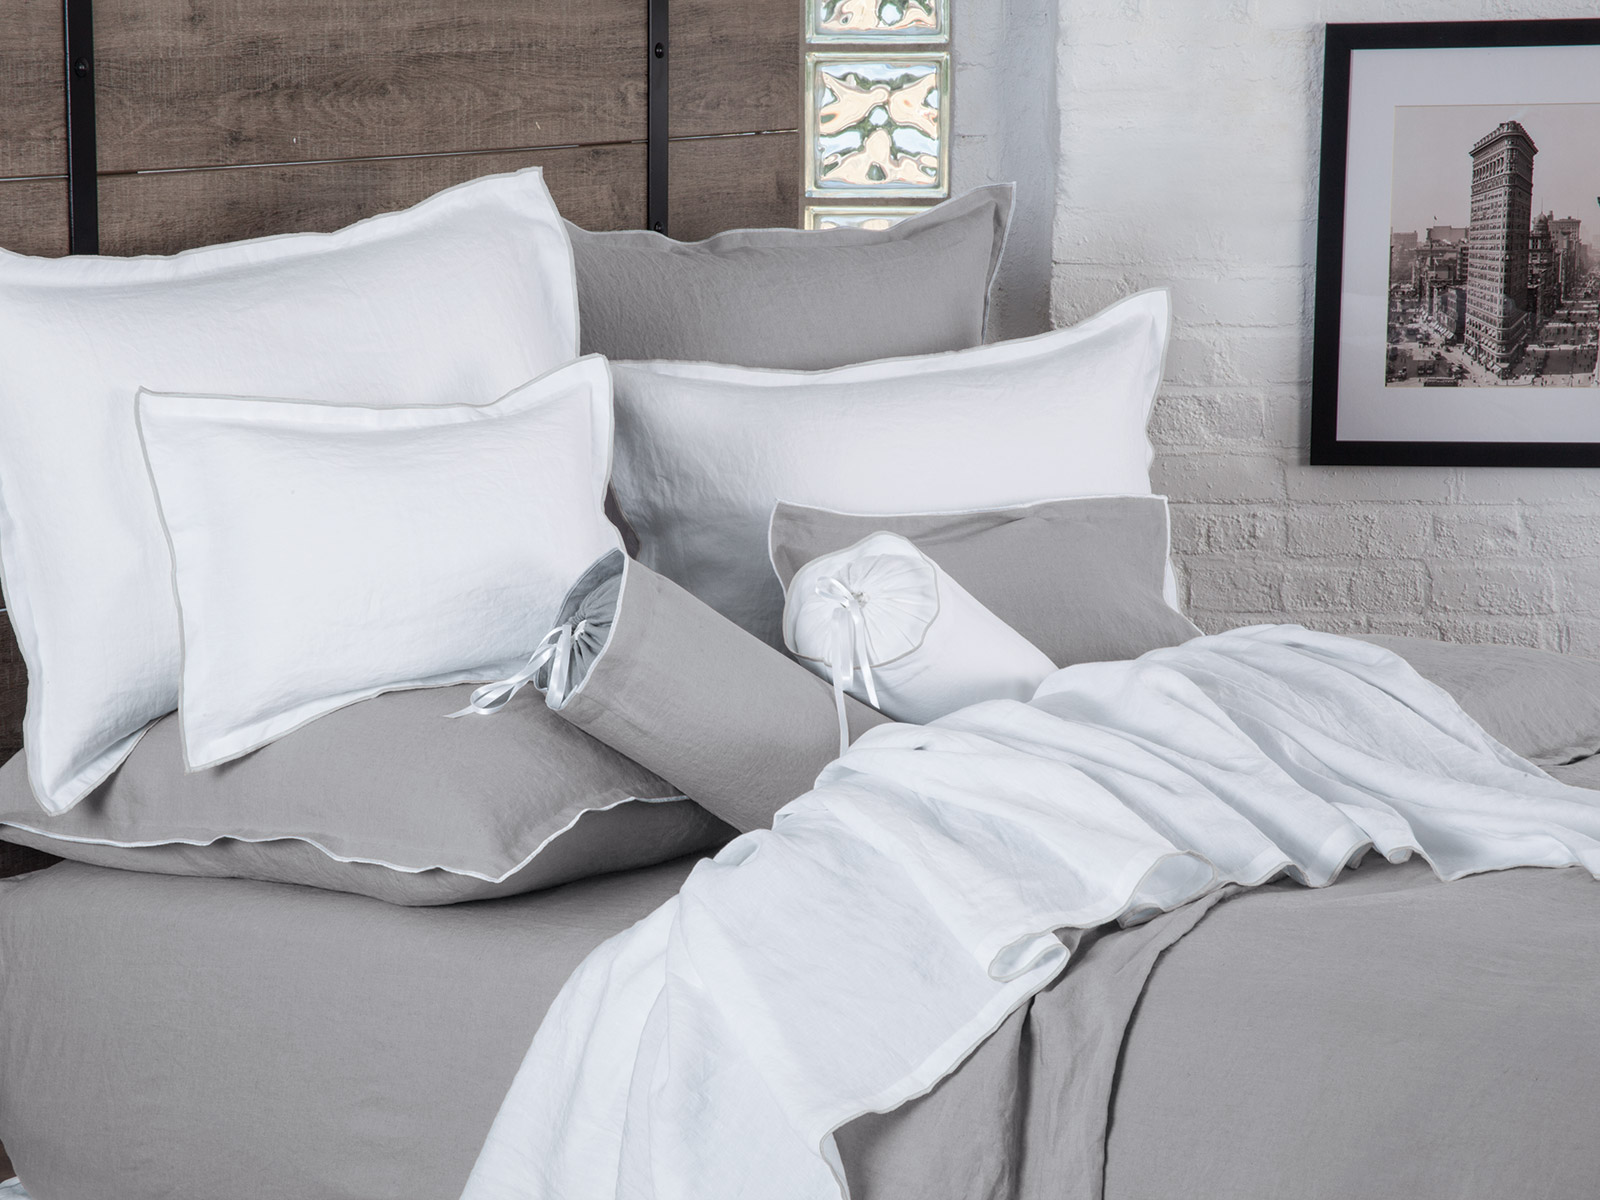  image of a Brooklyn bed linens